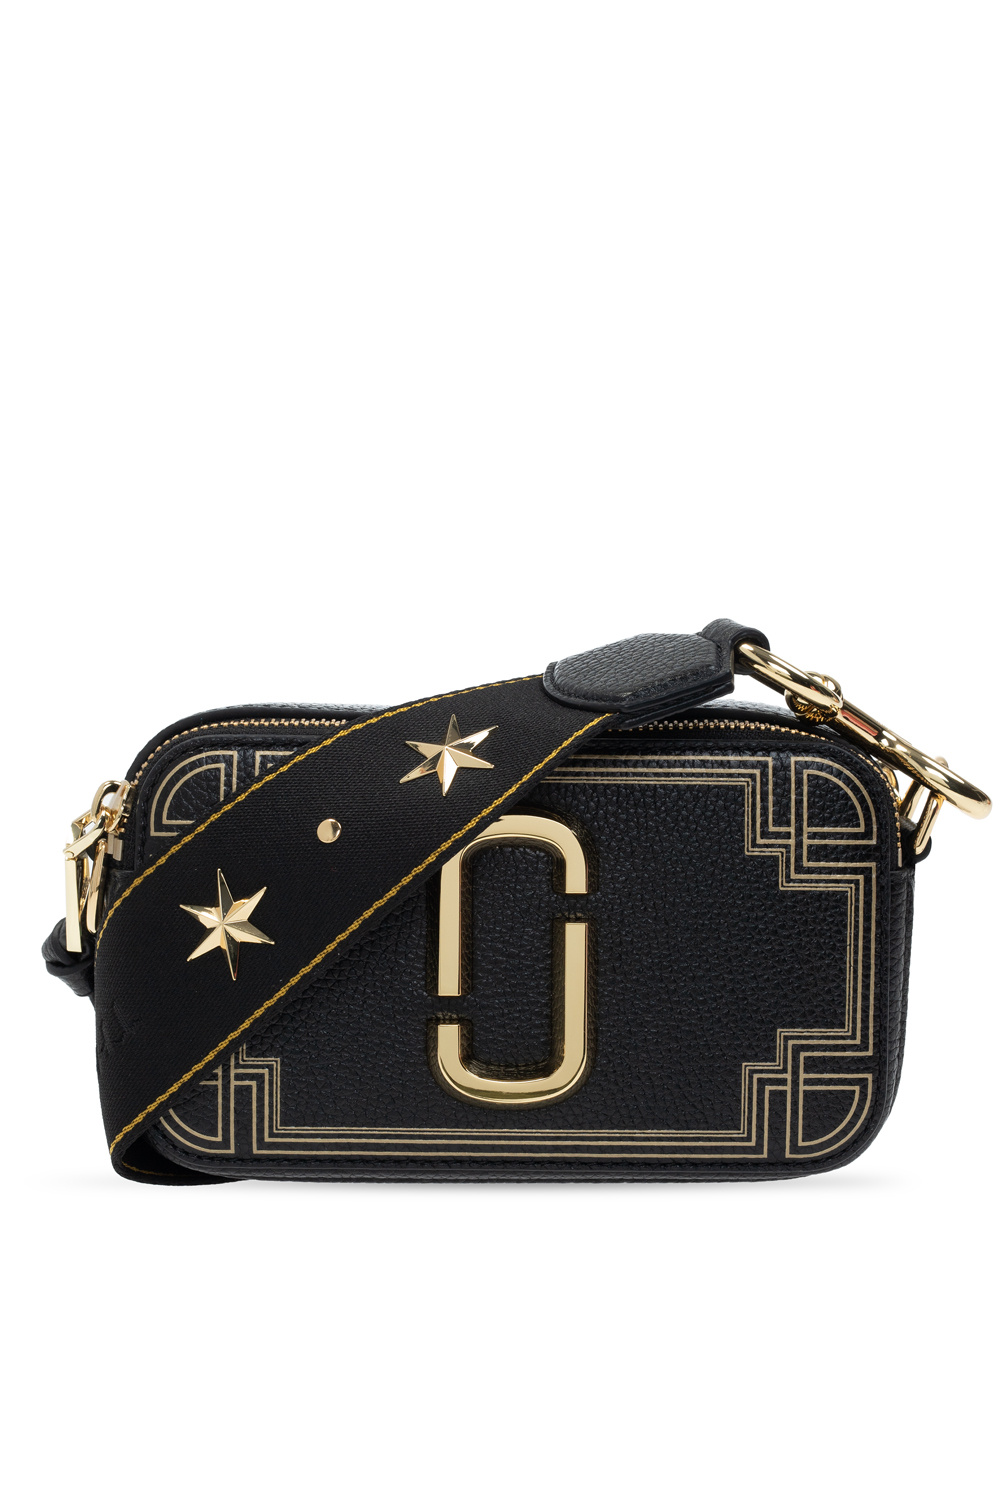 Marc Jacobs - The Snapshot camera bag - women - Leather - One Size - Black